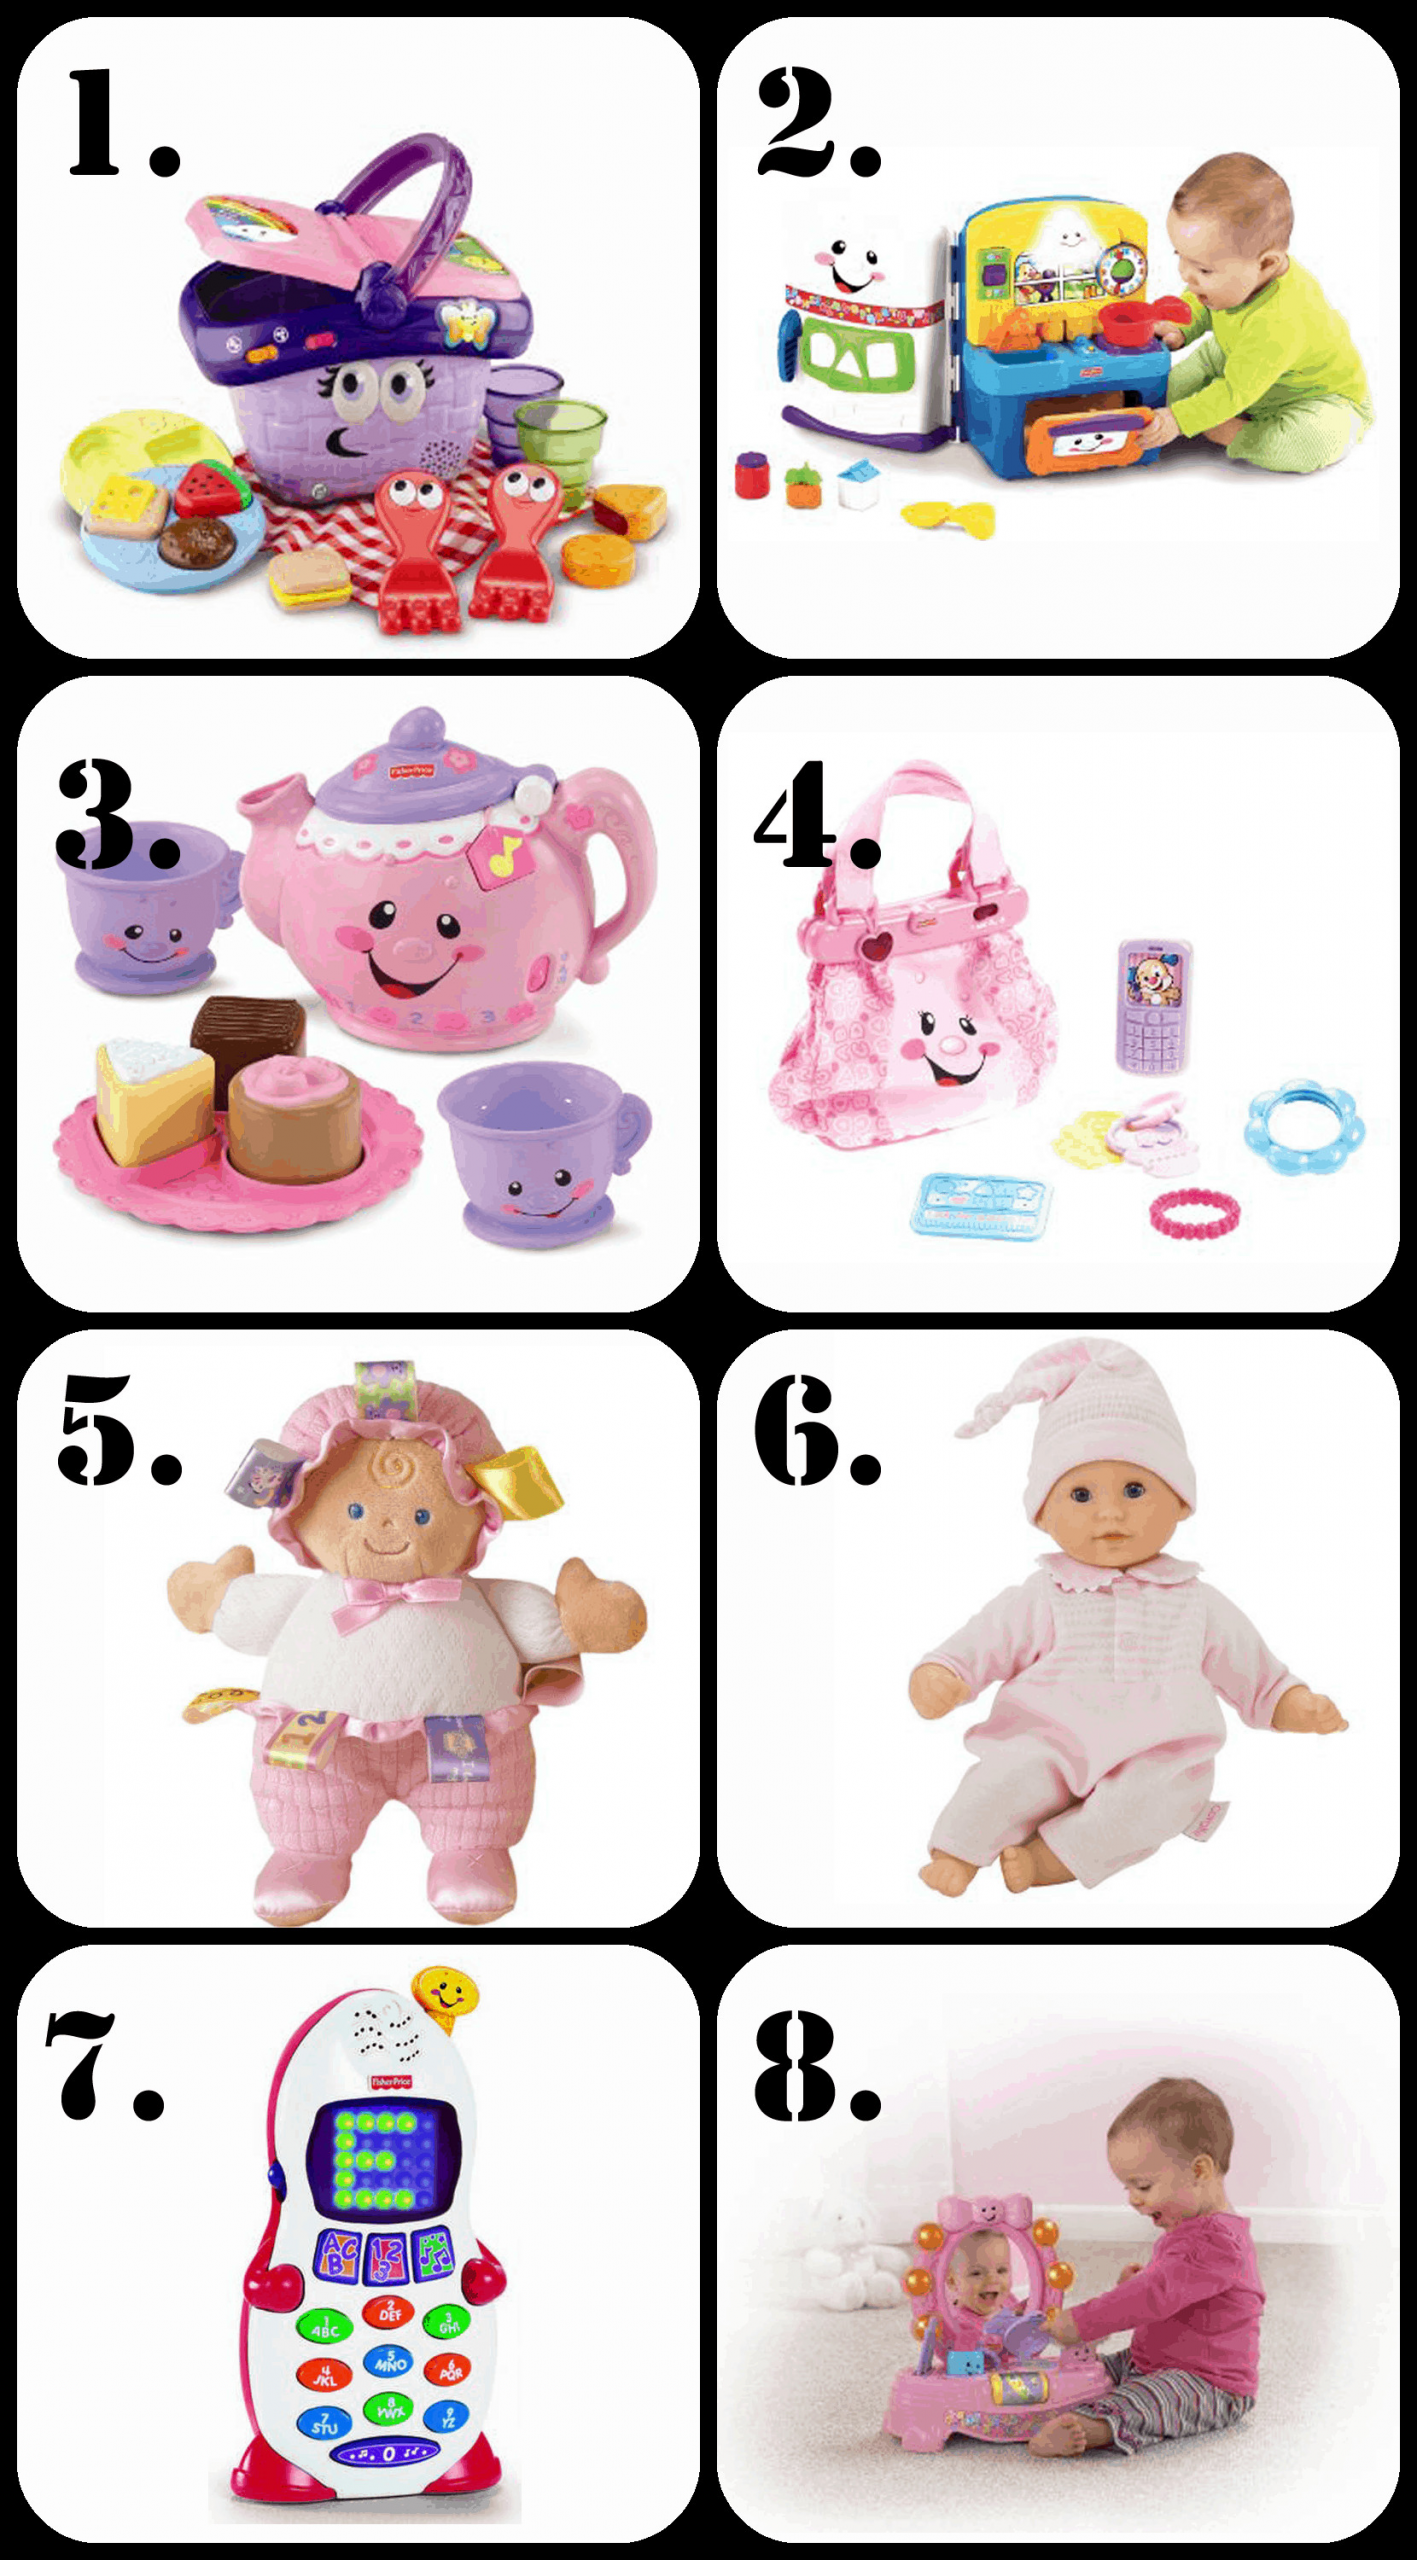 Best Birthday Gift For A 1 Year Old Baby Girl
 The Ultimate List of Gift Ideas for a 1 Year Old Girl